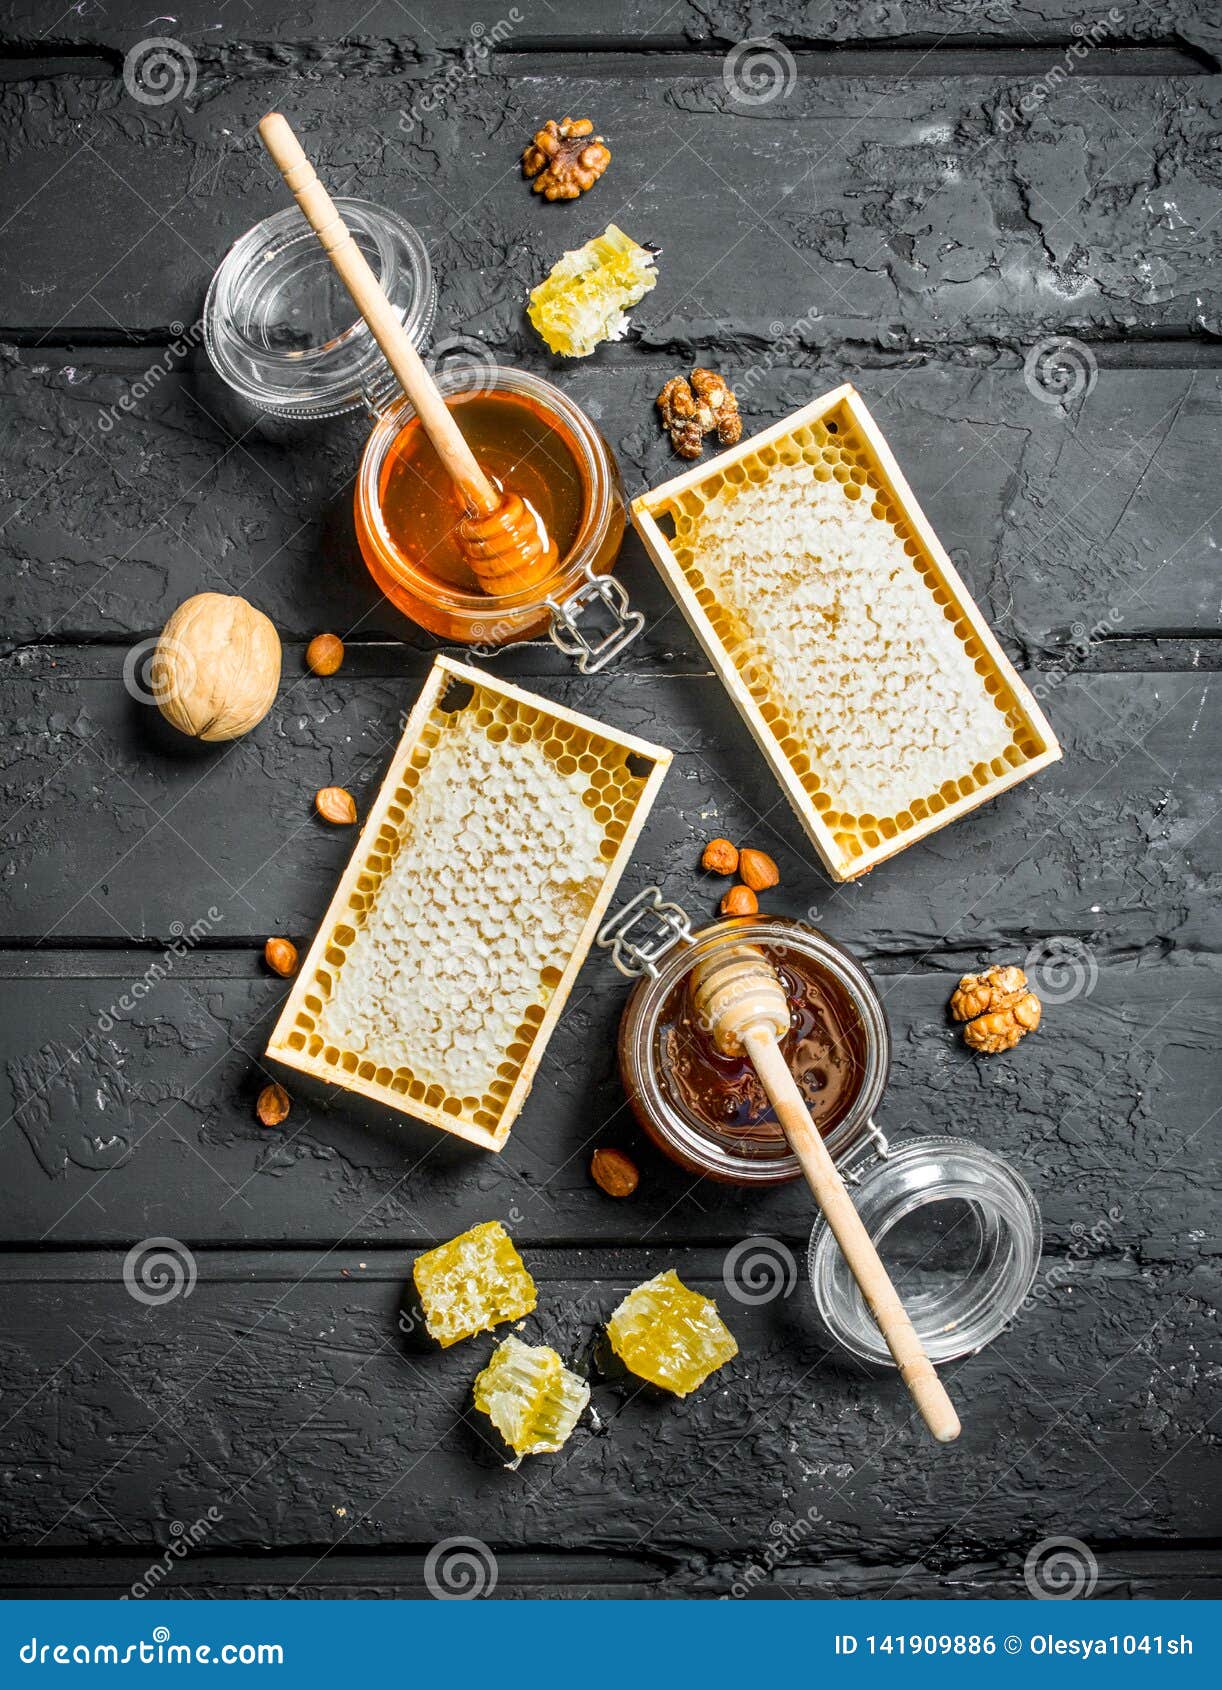 Different types of honey stock photo. Image of comb - 141909886